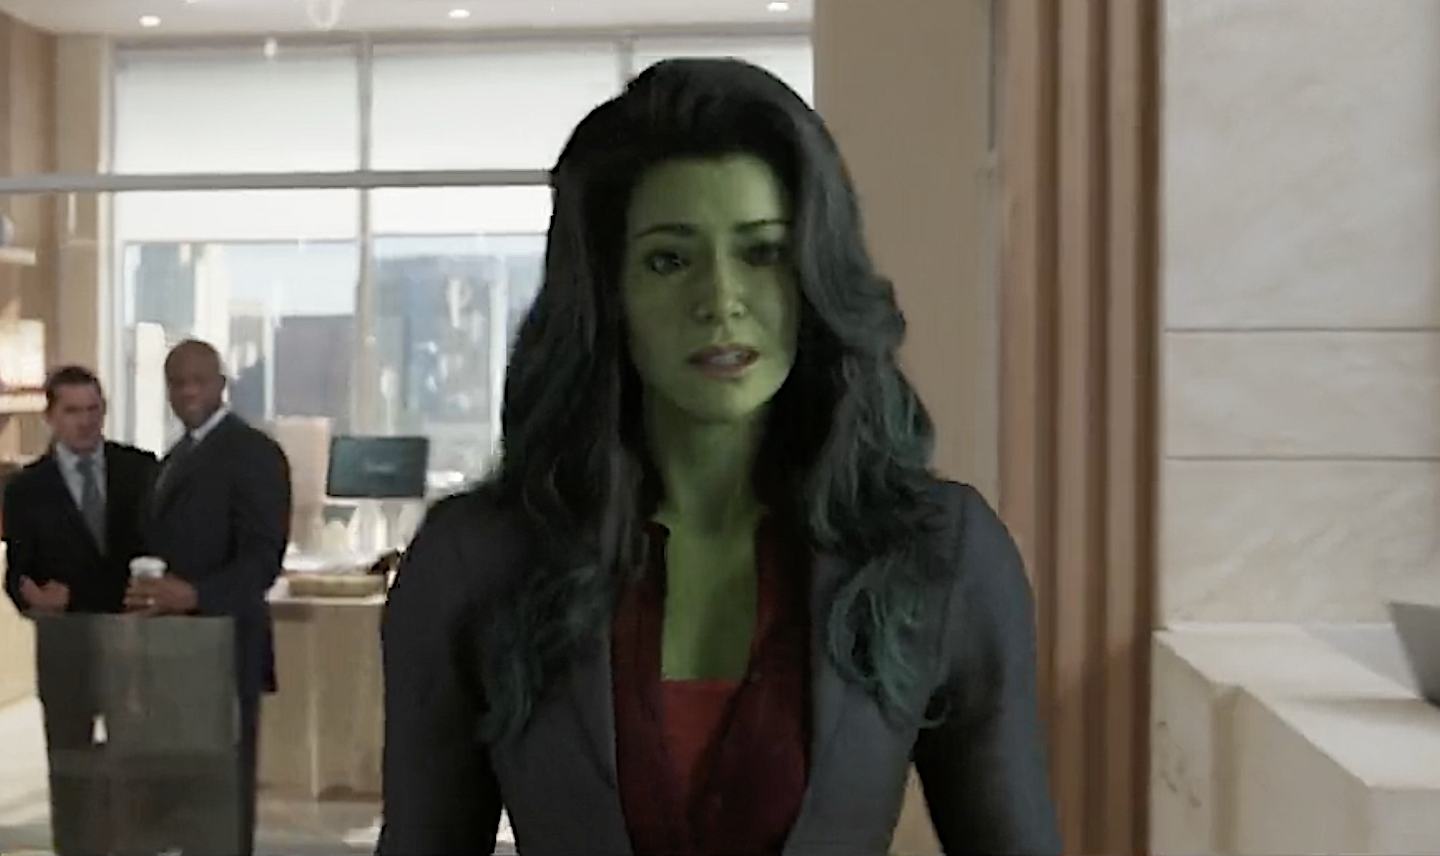 She-Hulk Gets Review Bombed Before Release